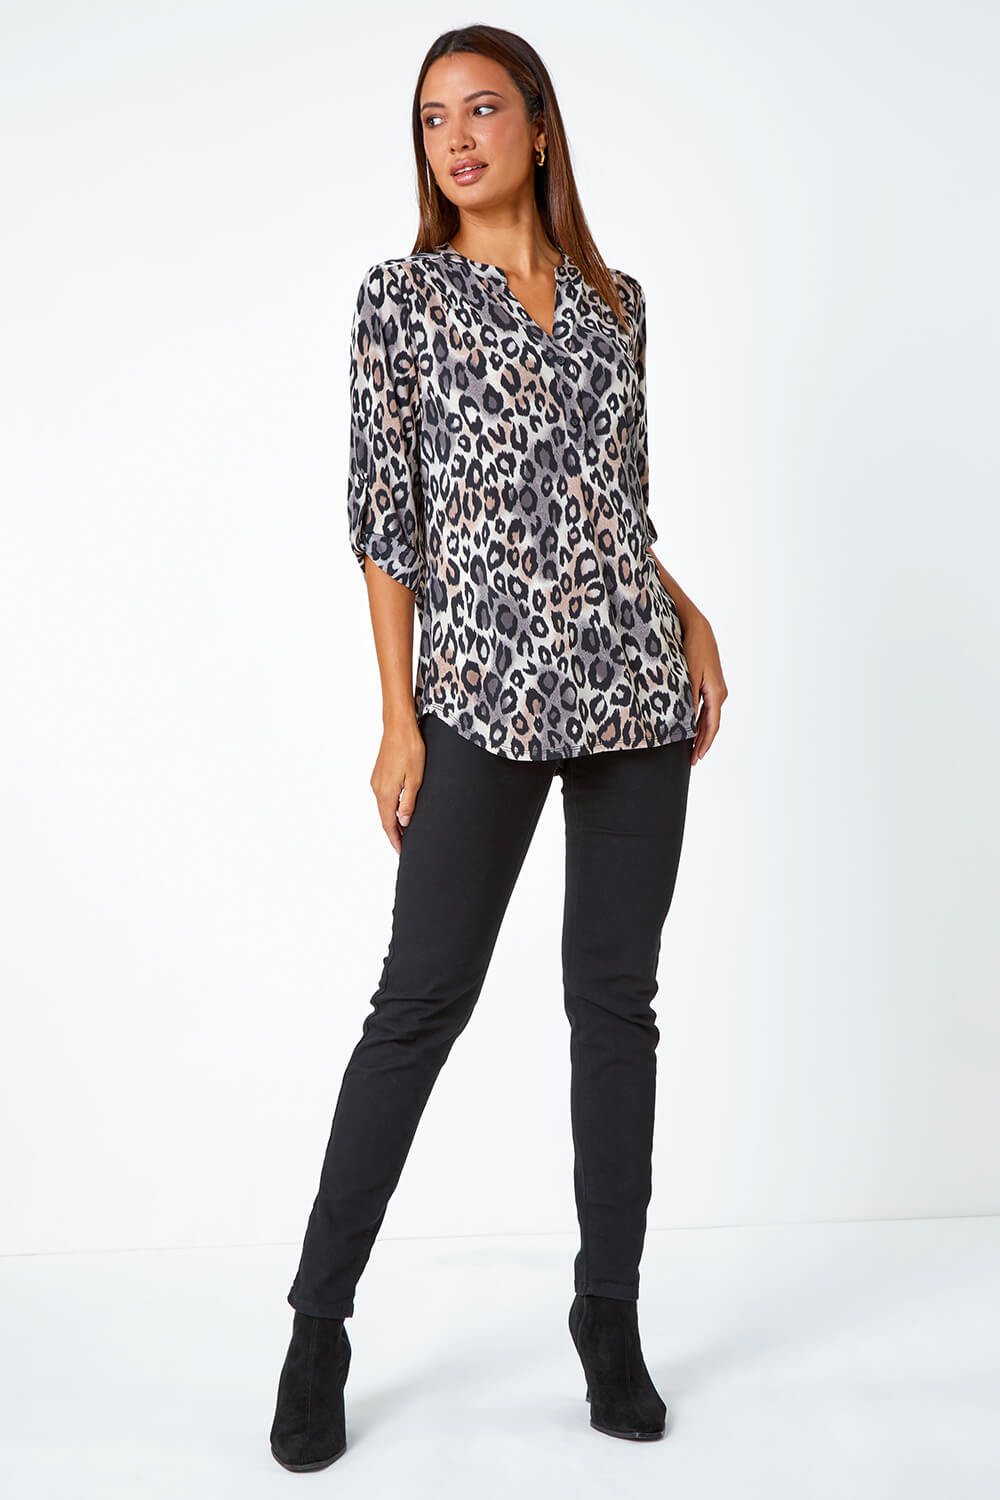 Taupe Animal Print Stretch Blouse, Image 4 of 5